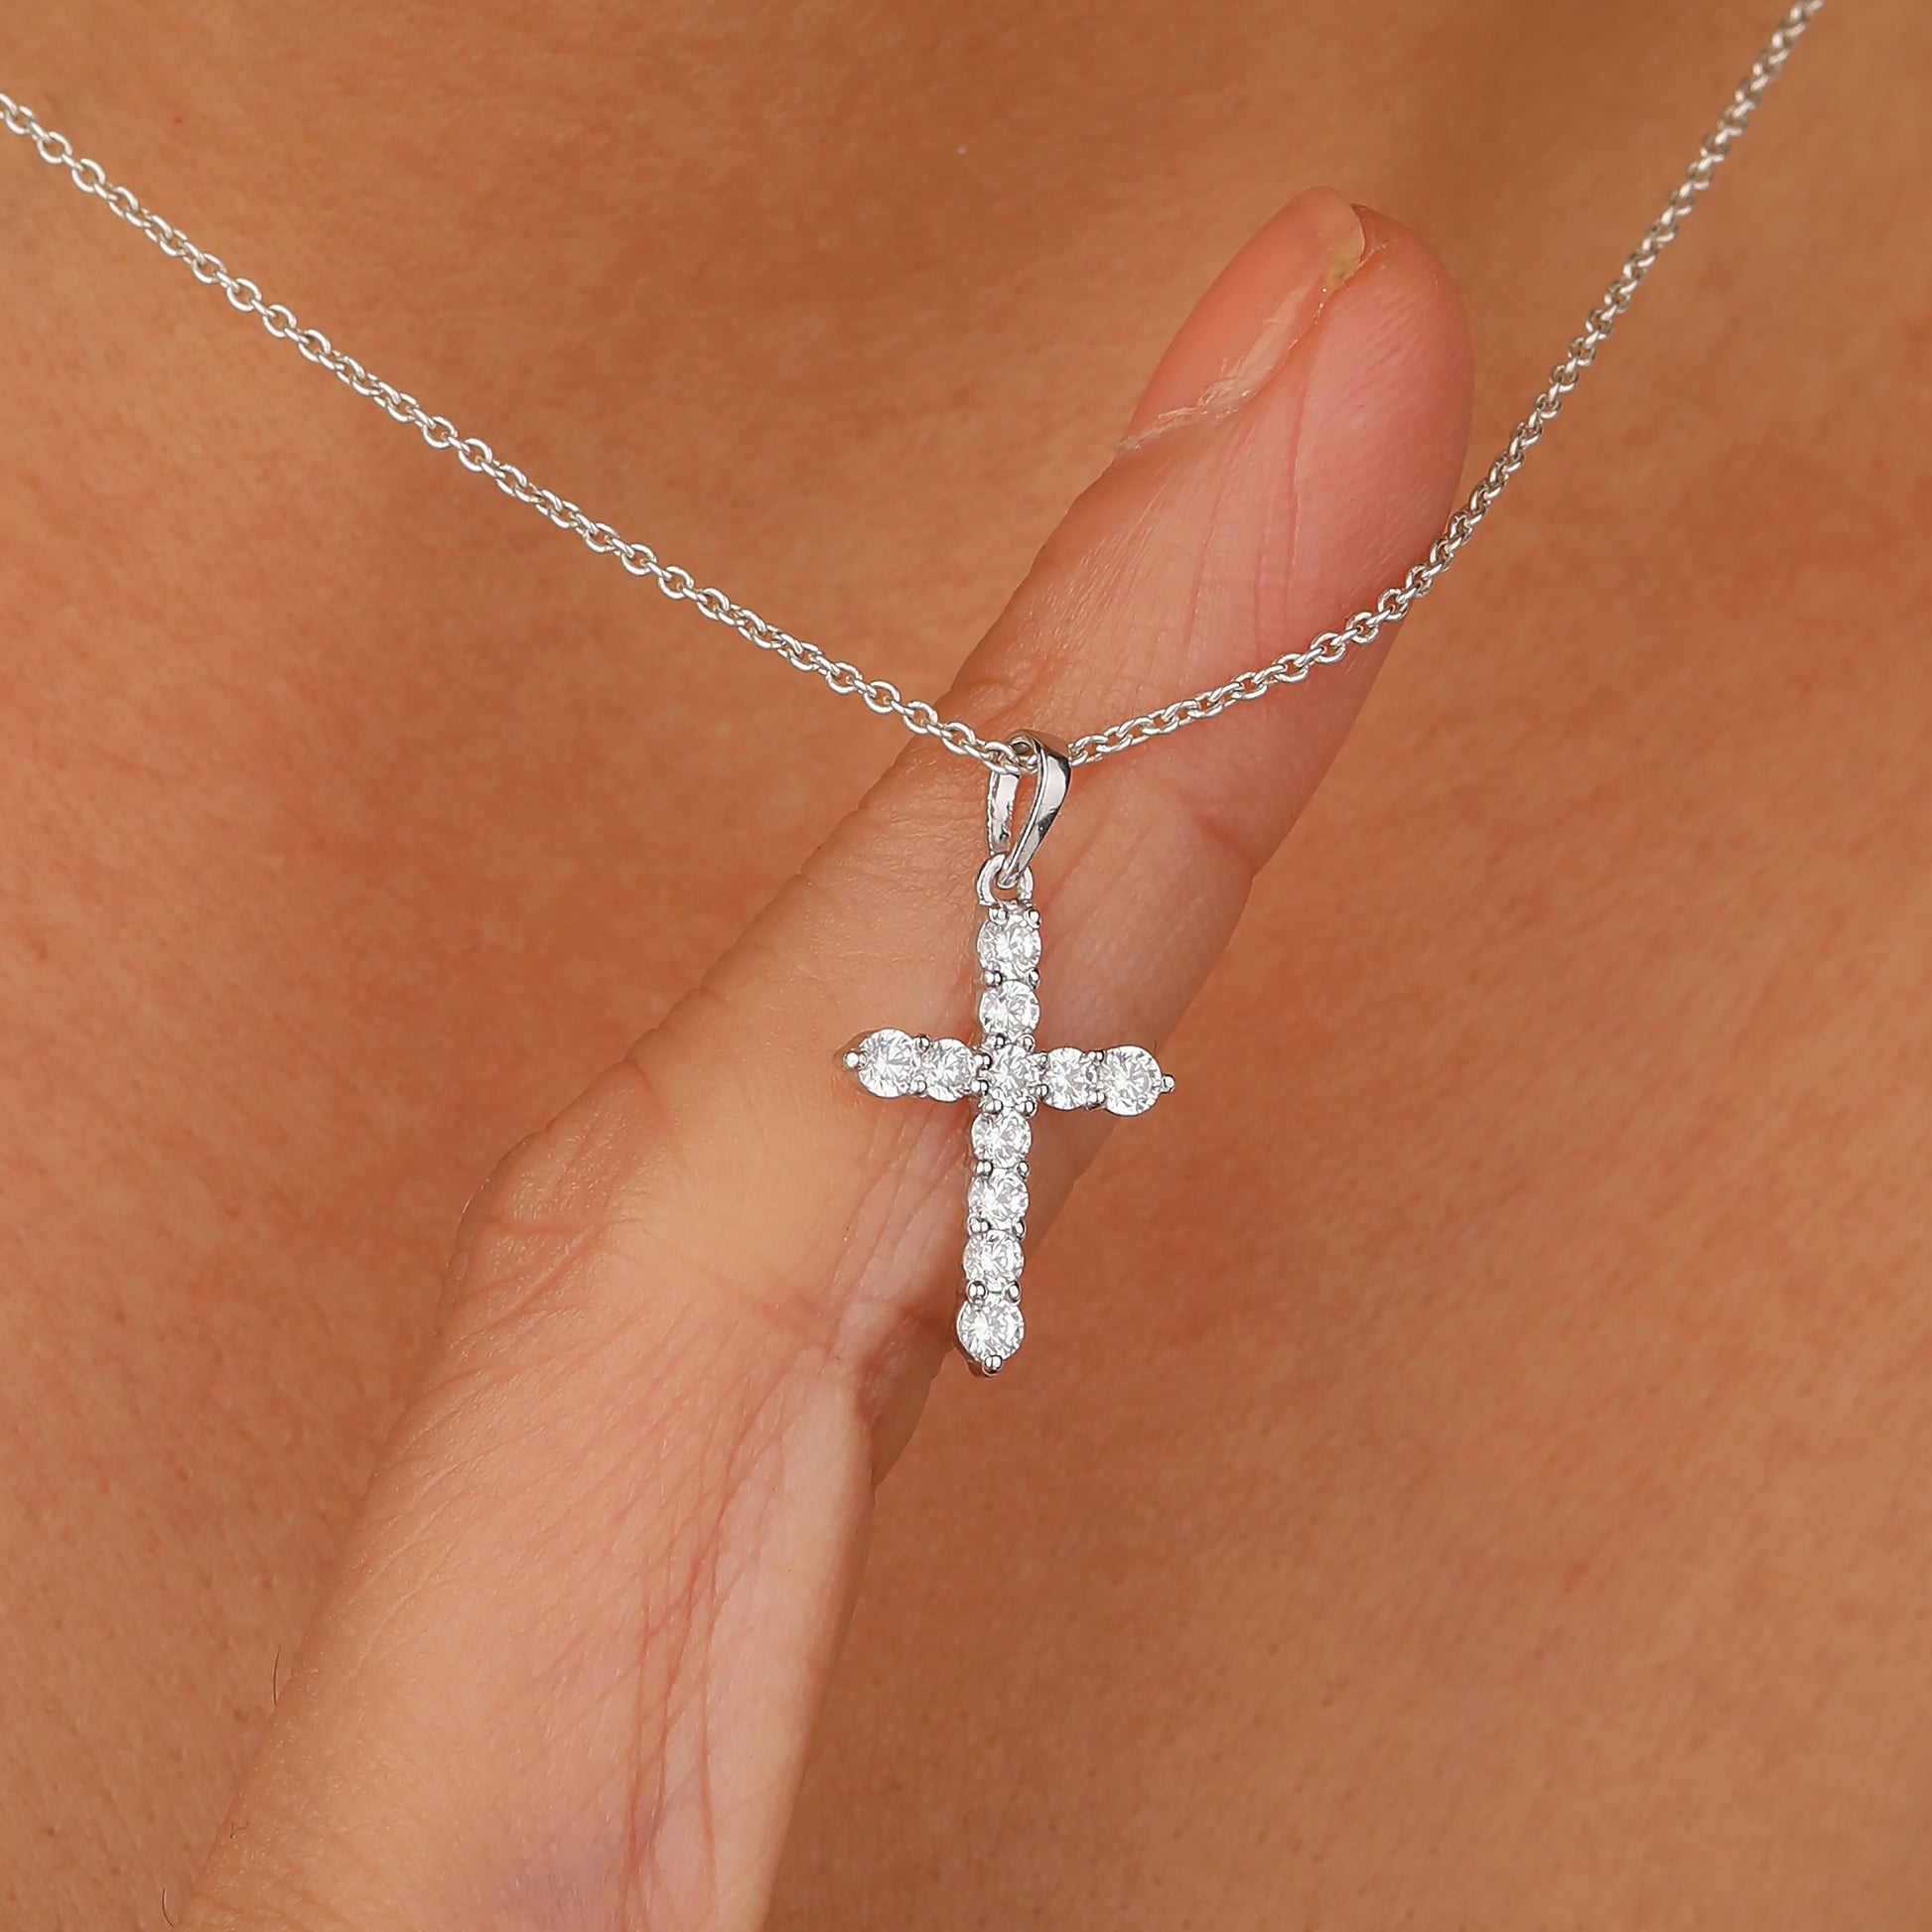 cross necklace for women